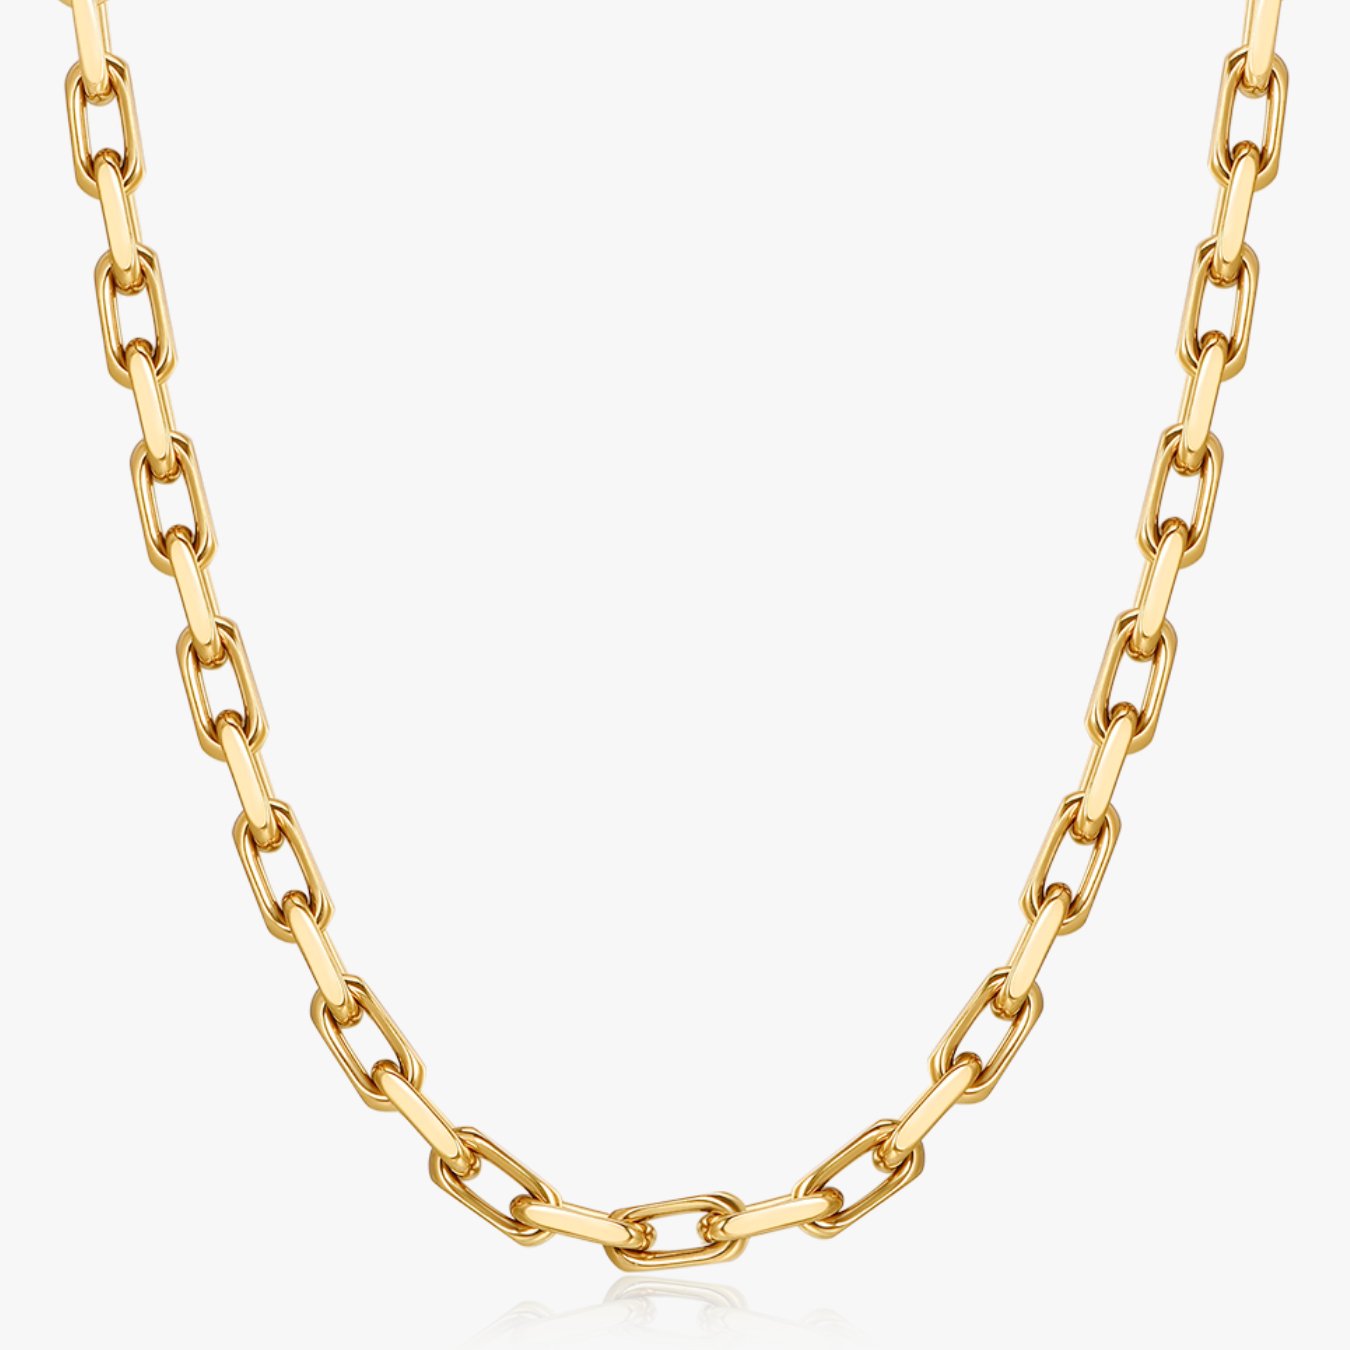 Oakley Gold Chain (Unisex) - Flaire & Co.